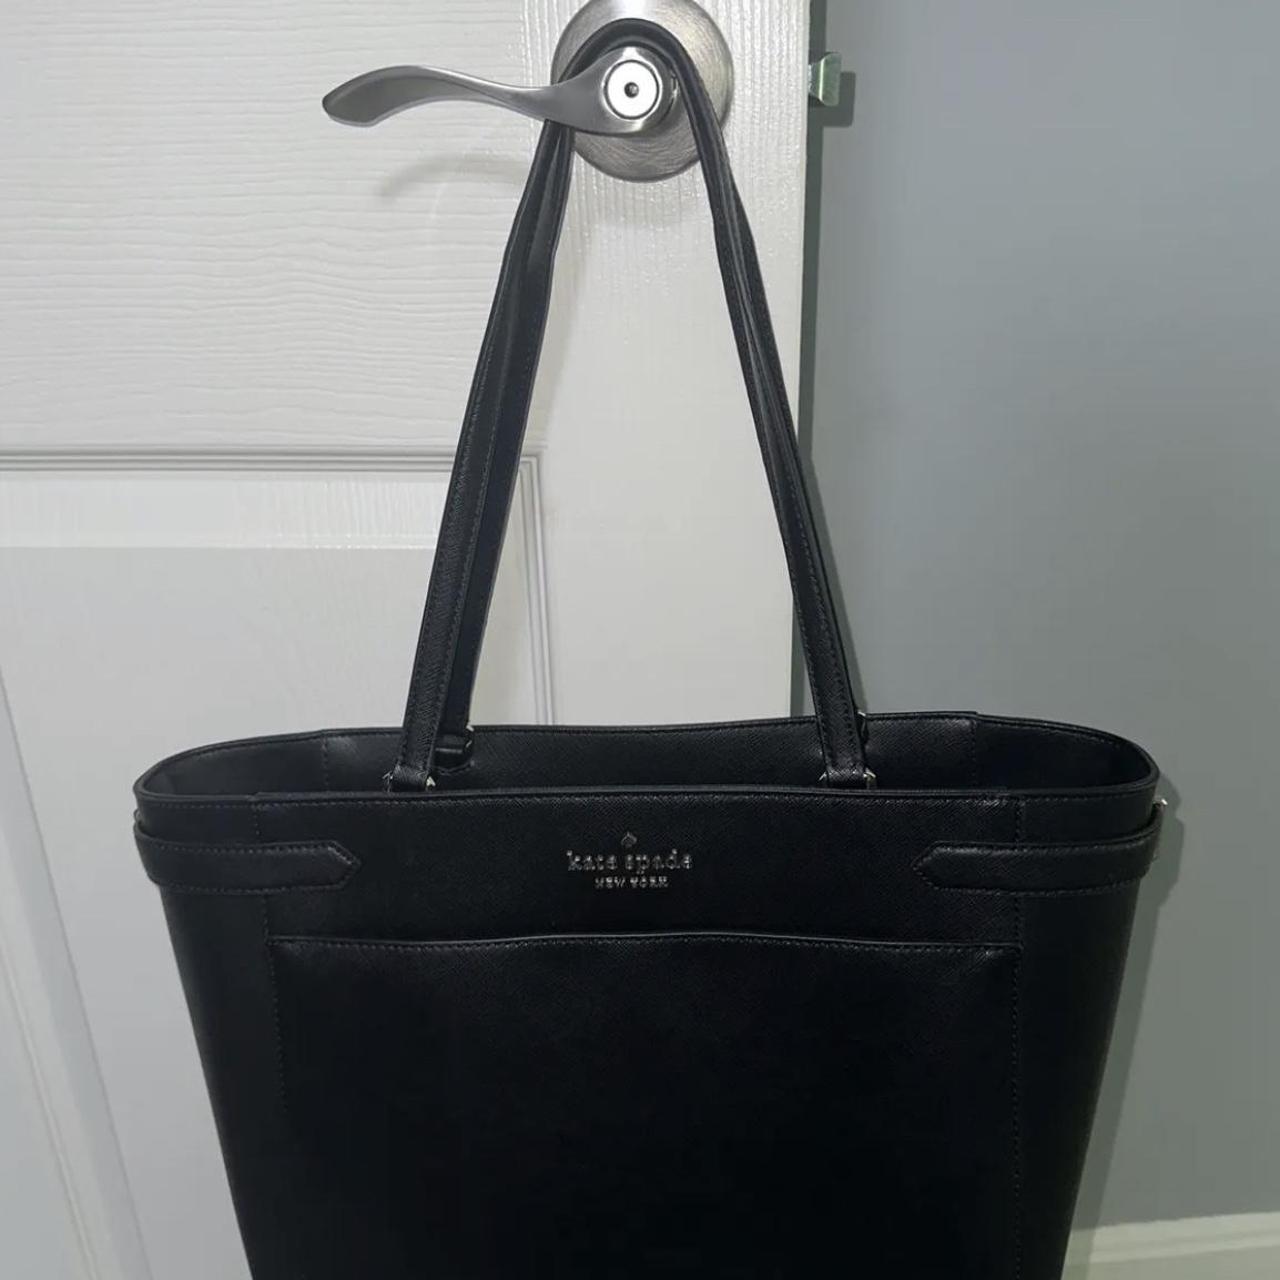  Kate Spade Staci Laptop Tote Triple compartment